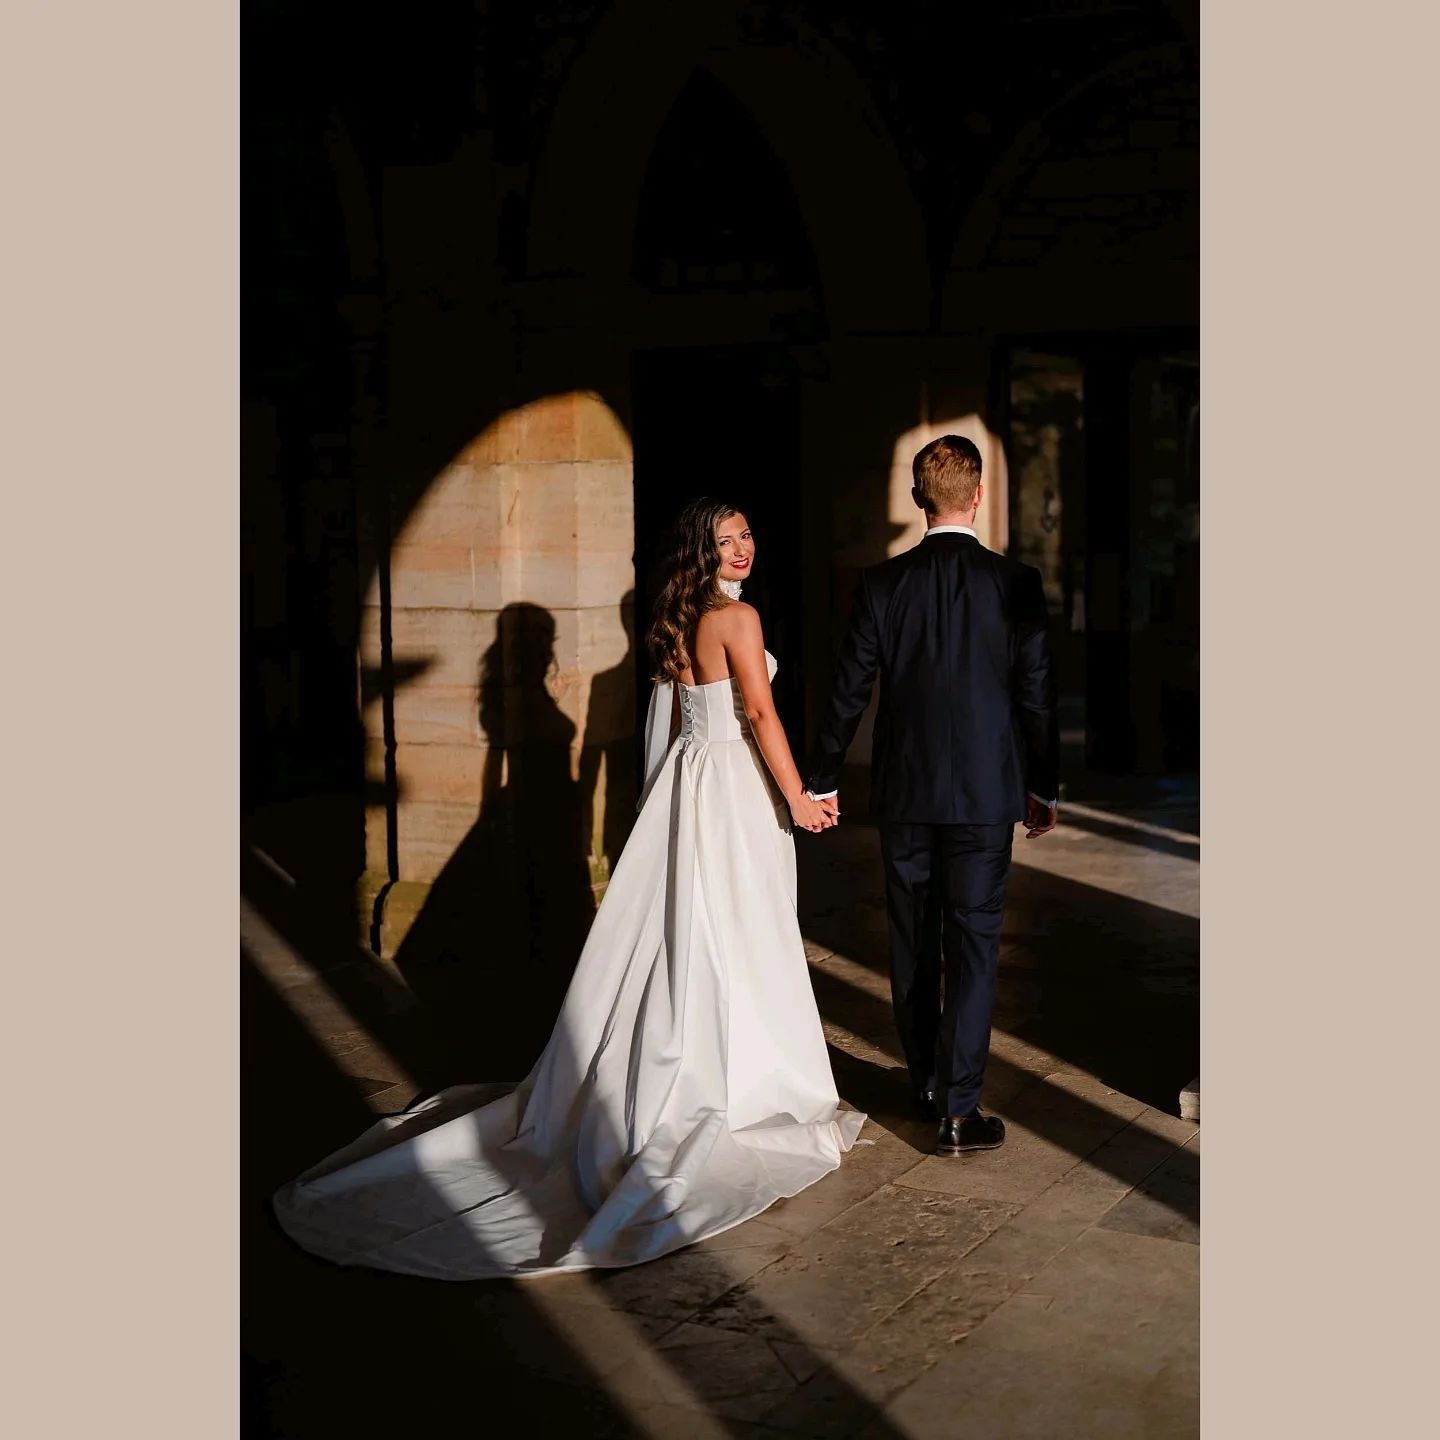 This is day 2 of Lauretta and Jed's two-day wedding, which took place at Hever Castle. We had stunning conditions for some portraits in the gardens and loggia during sundown. 

I cannot wait to go through the rest of the photos.

A beautiful couple w